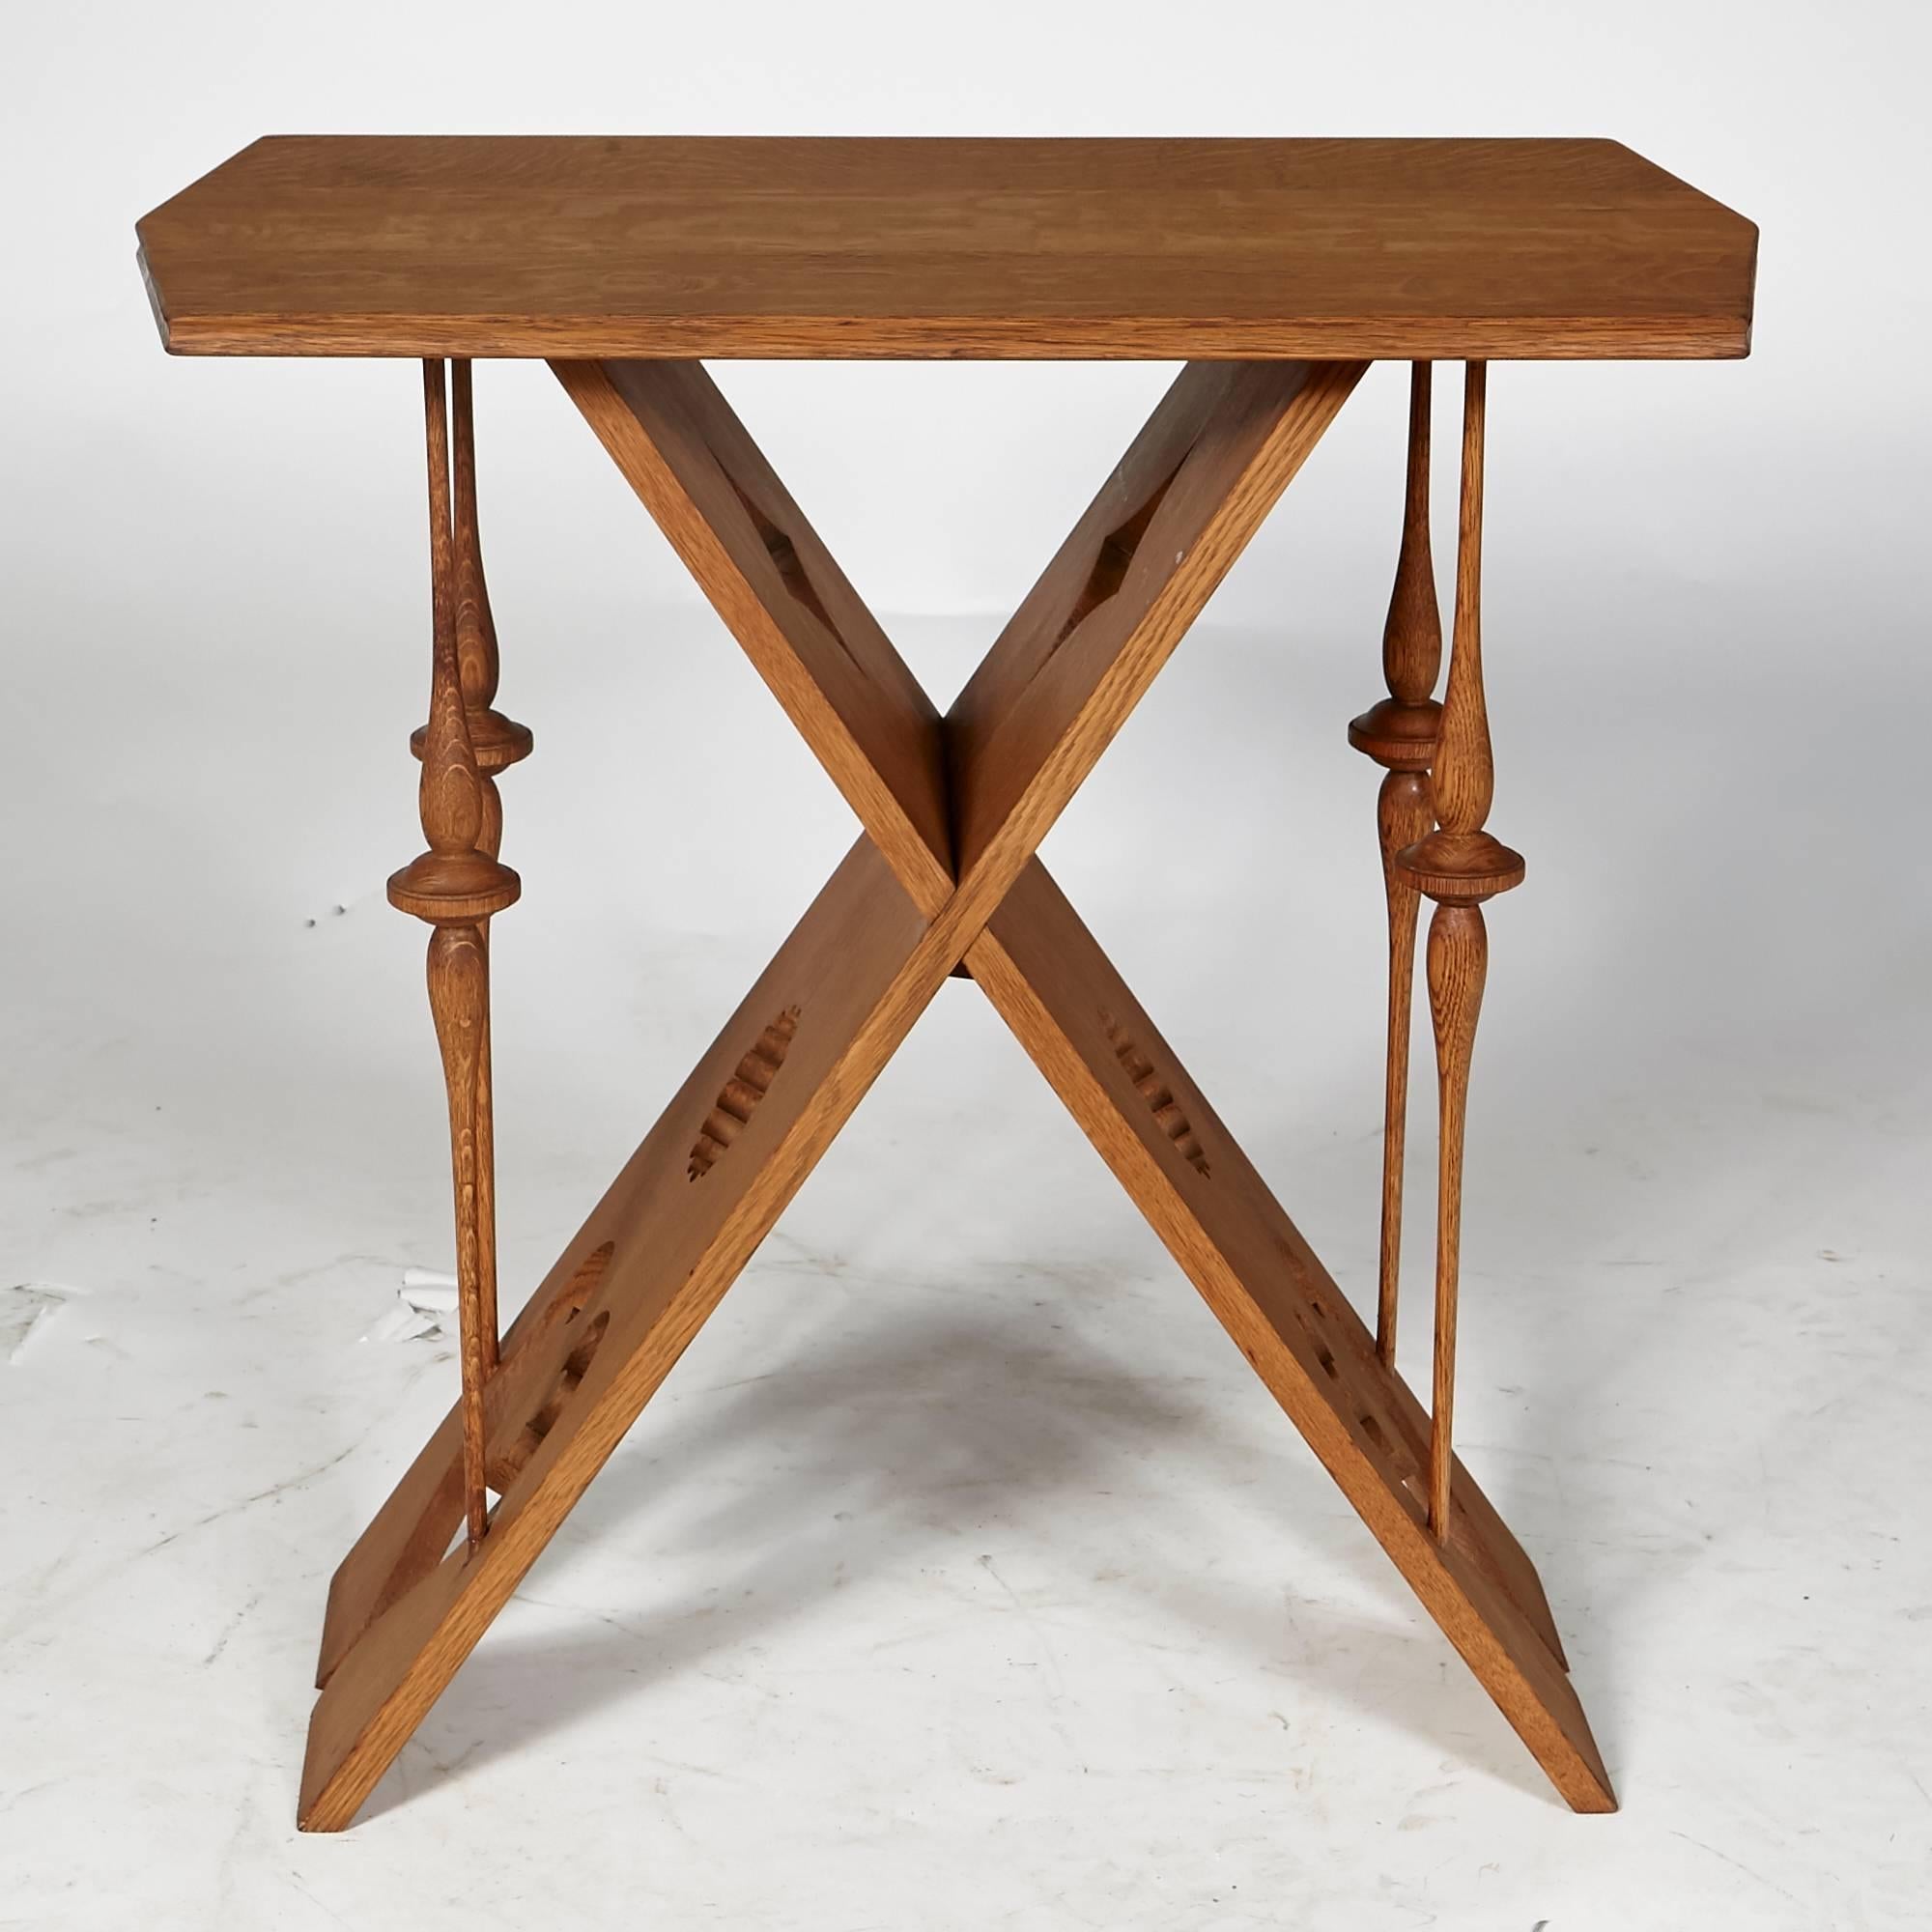 Vintage Arts & Crafts style quarter-sawn oak wood hand made occasional table, circa 1920s. The table has hand cutout decorative accents with four hand spun rails. In refinished condition. 